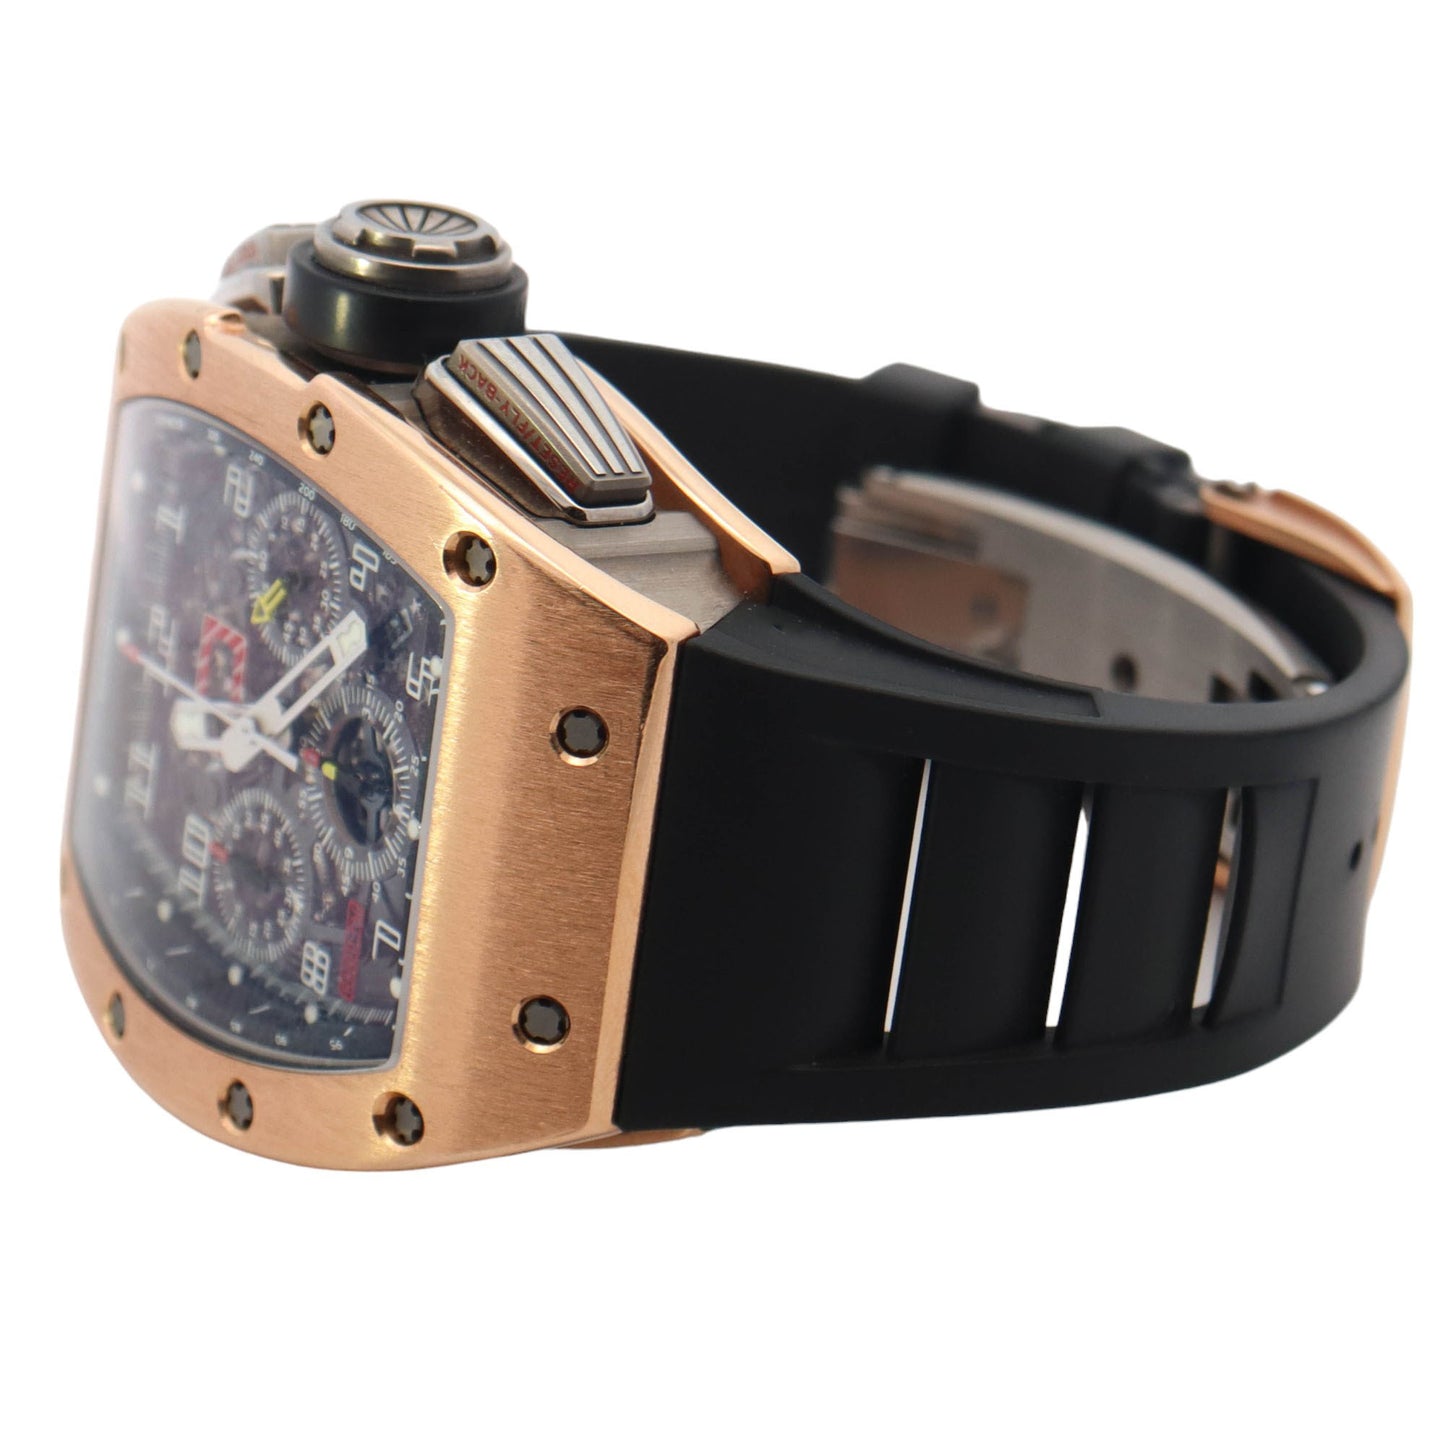 Richard Mille RM011 Rose Gold 41mm x 50mm Skeleton Arabic Dial Watch Reference# RM011 AK RG - Happy Jewelers Fine Jewelry Lifetime Warranty